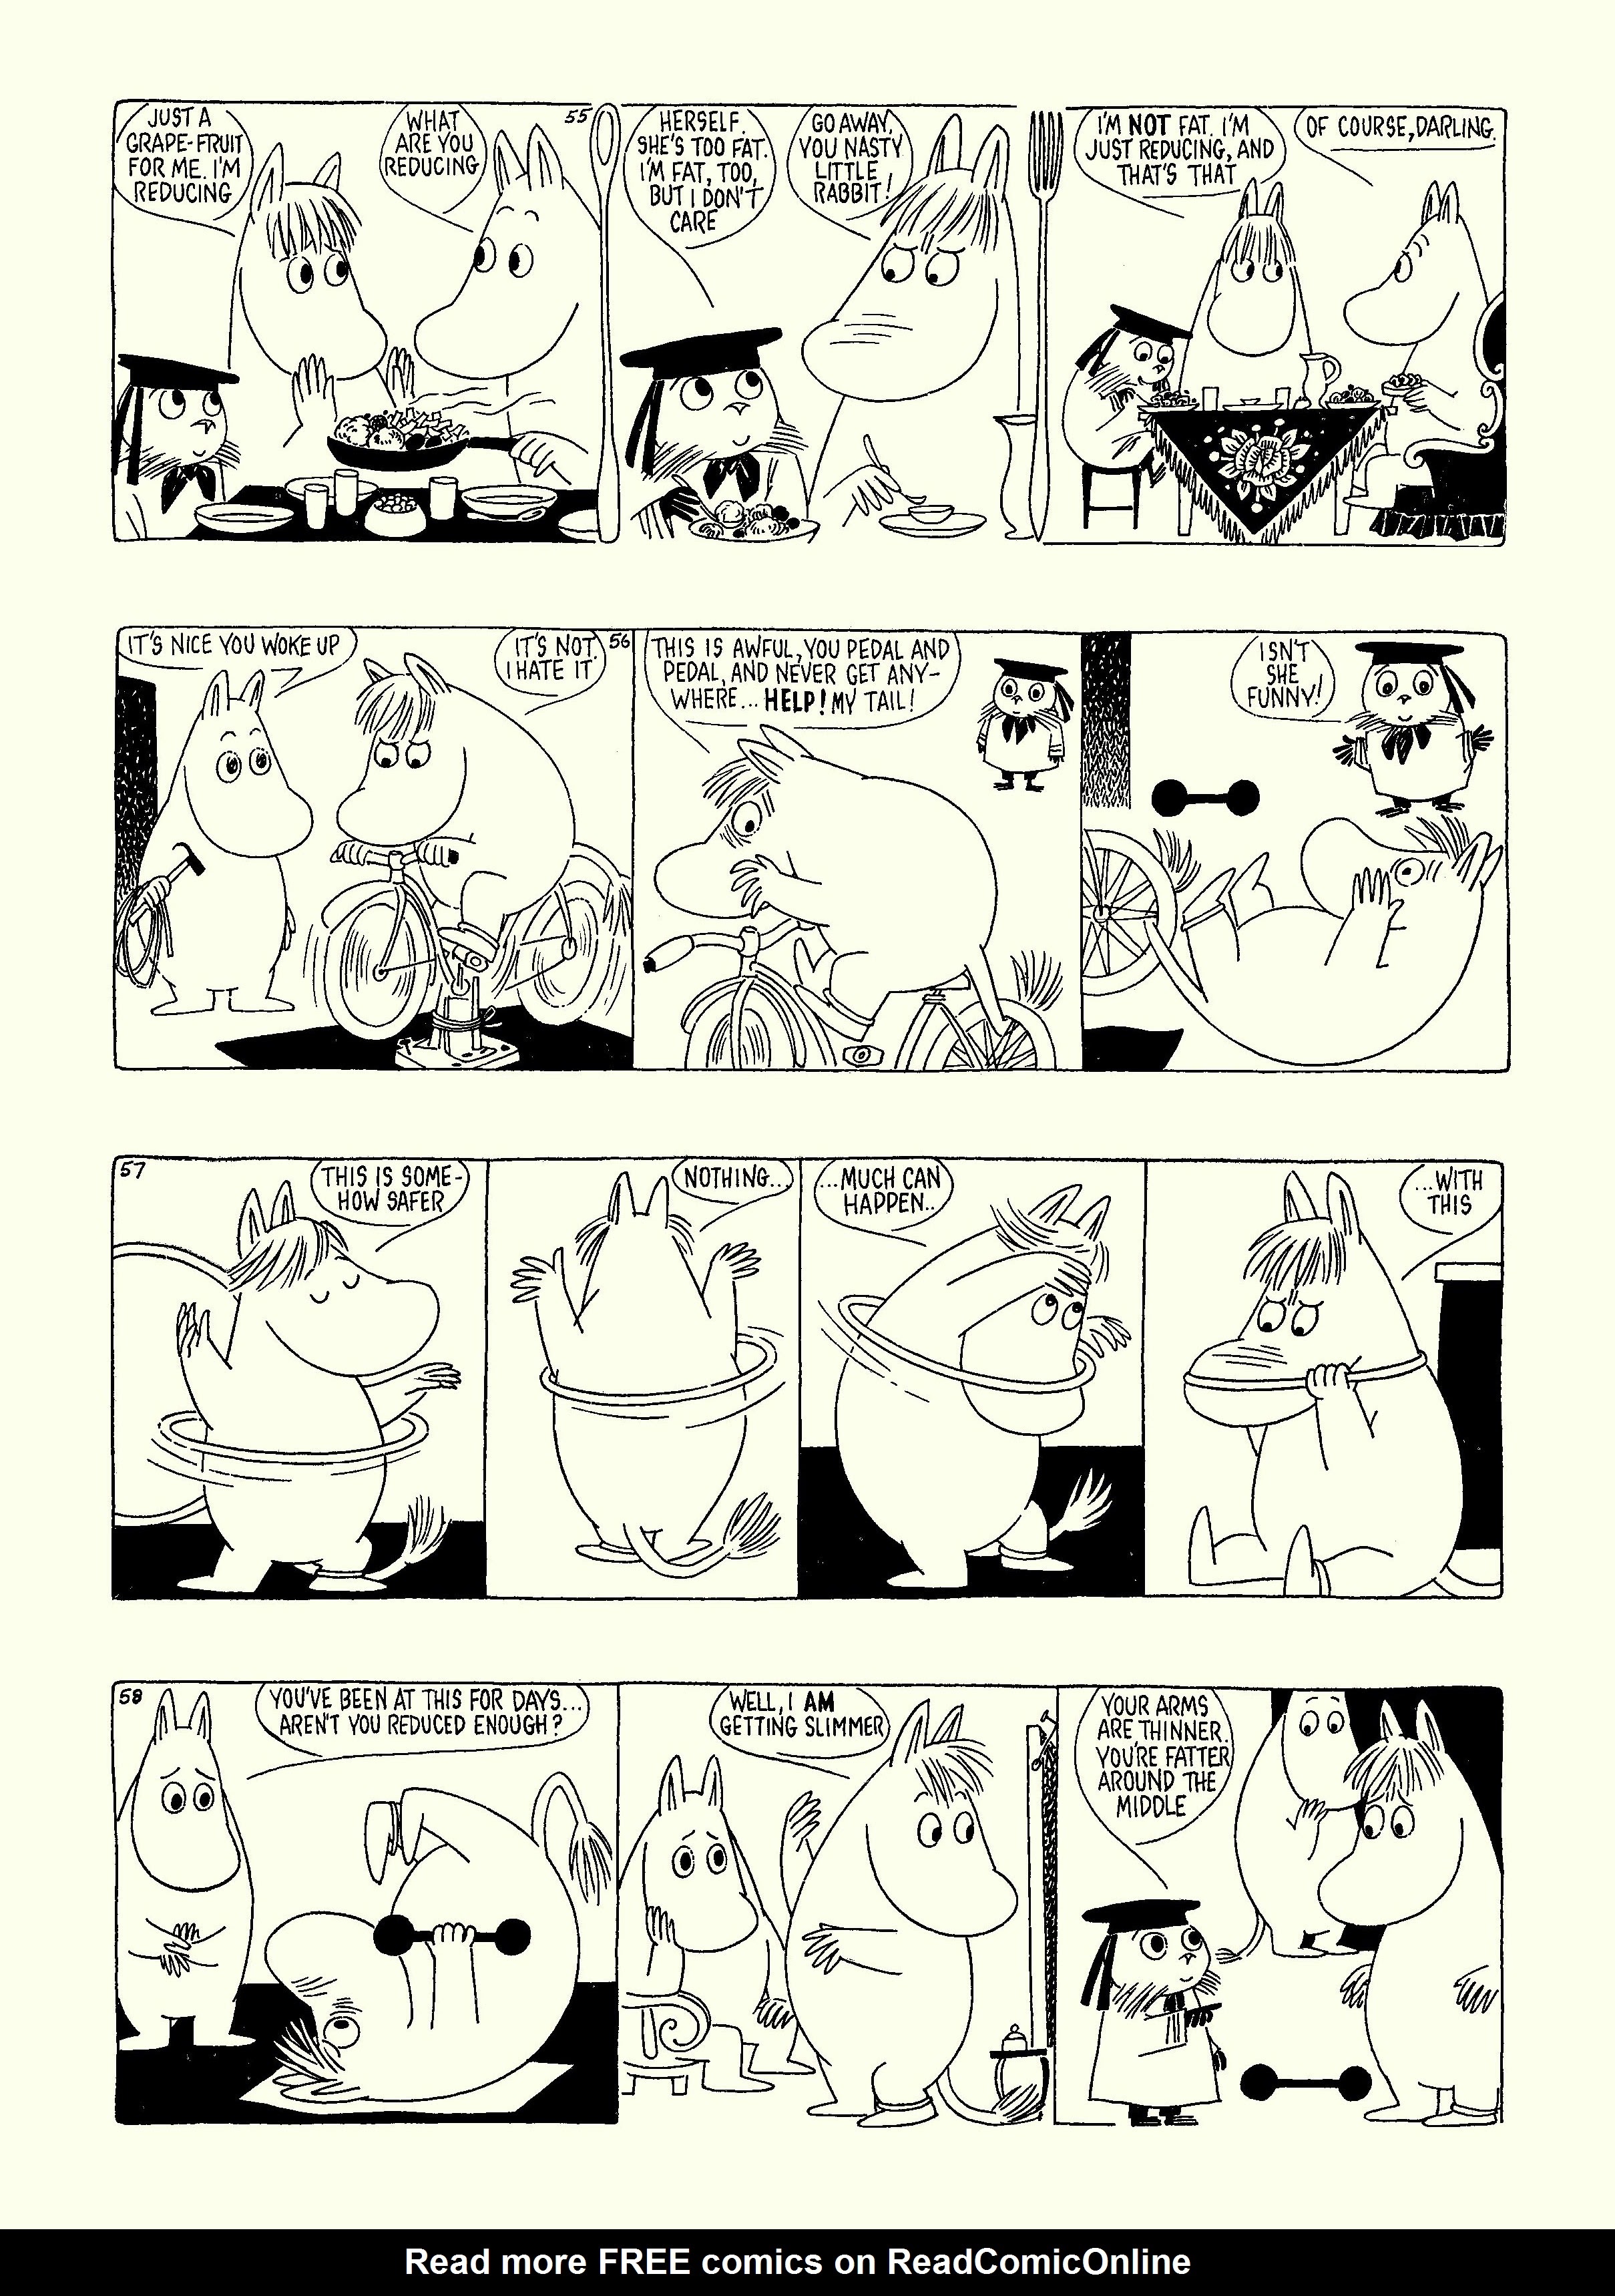 Read online Moomin: The Complete Tove Jansson Comic Strip comic -  Issue # TPB 5 - 20